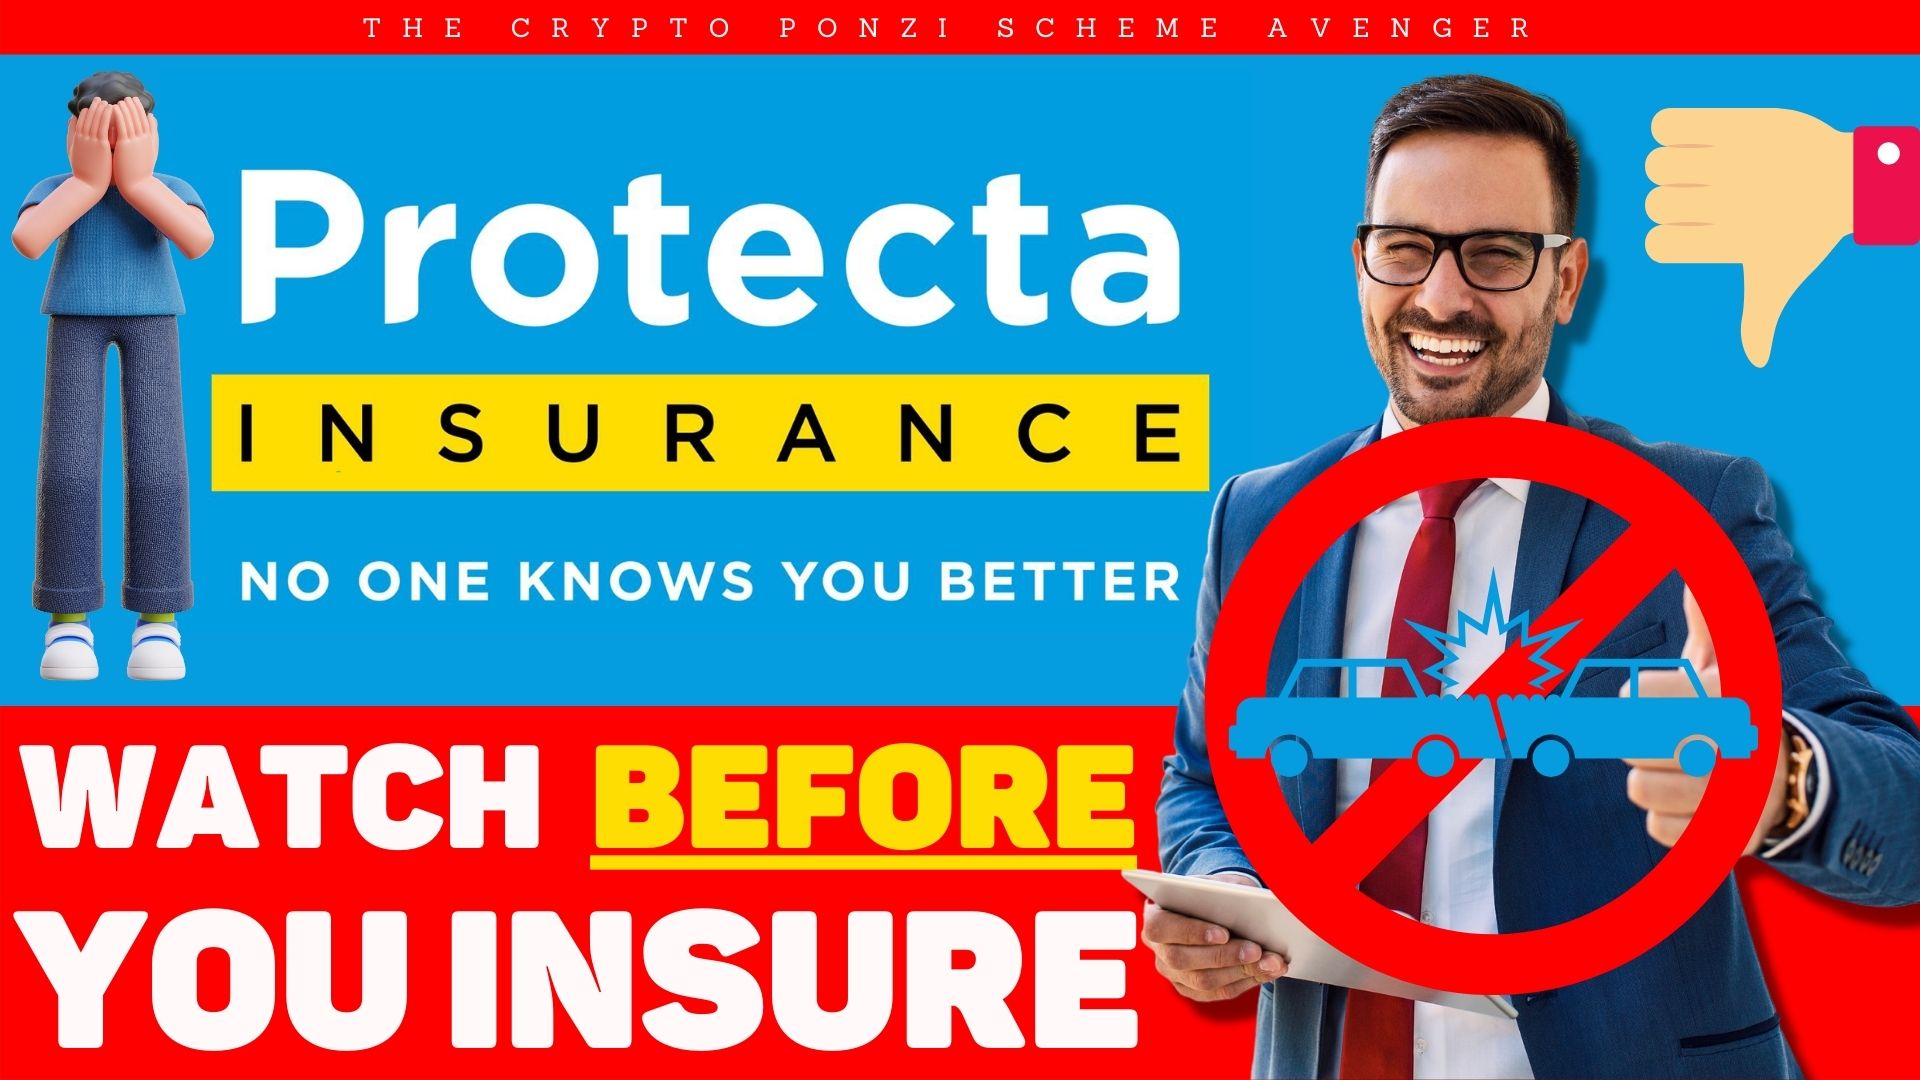 Protecta Insurance New Zealand: MUST WATCH Before You Insure! Unveiling Shocking Insurance Injustice